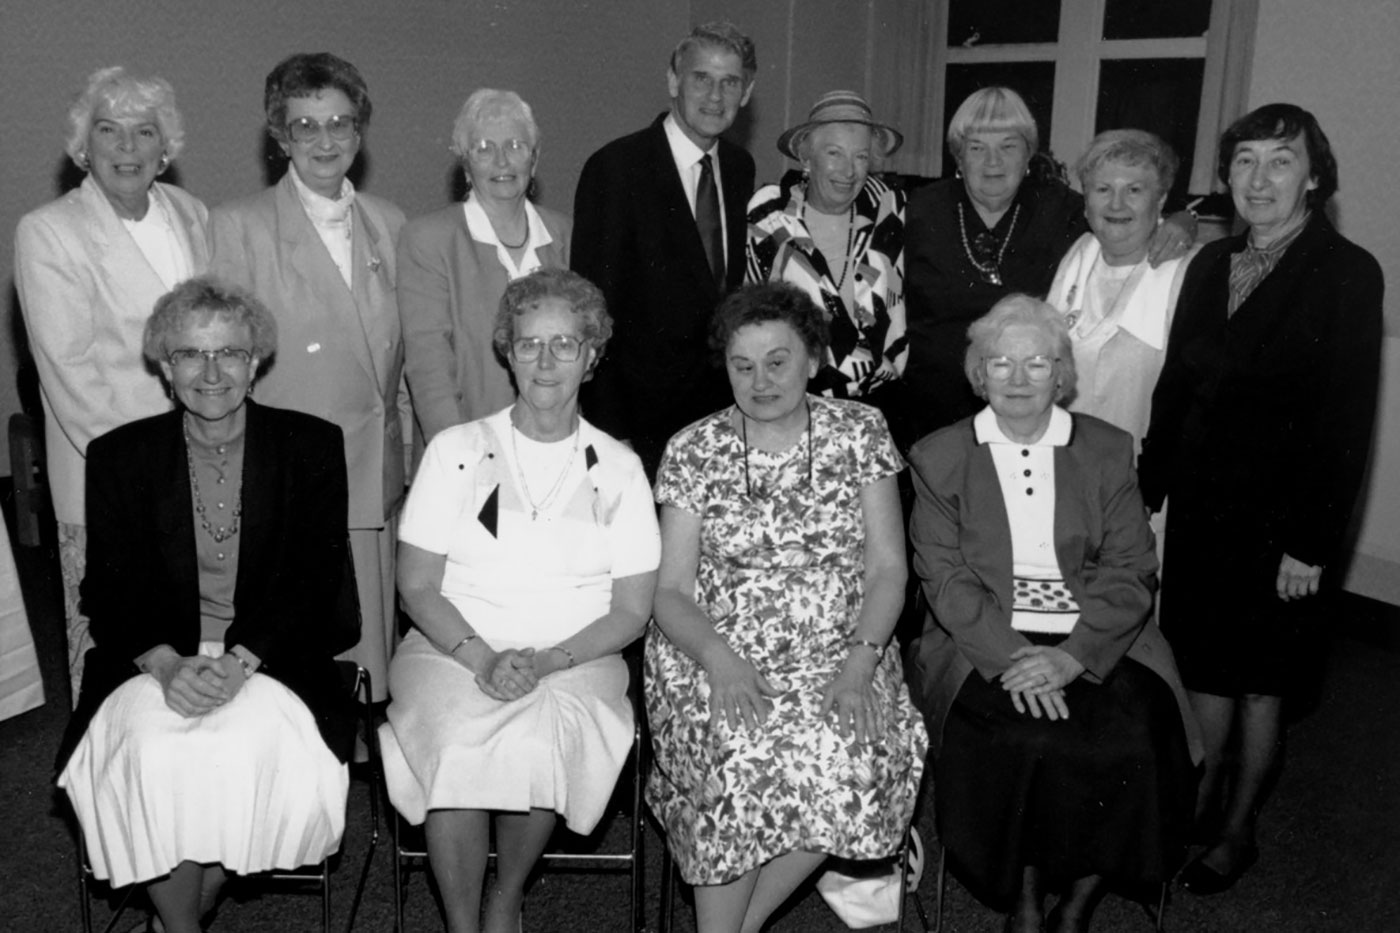 50th reunion of the first class of women undergraduate students, May 3, 1993.